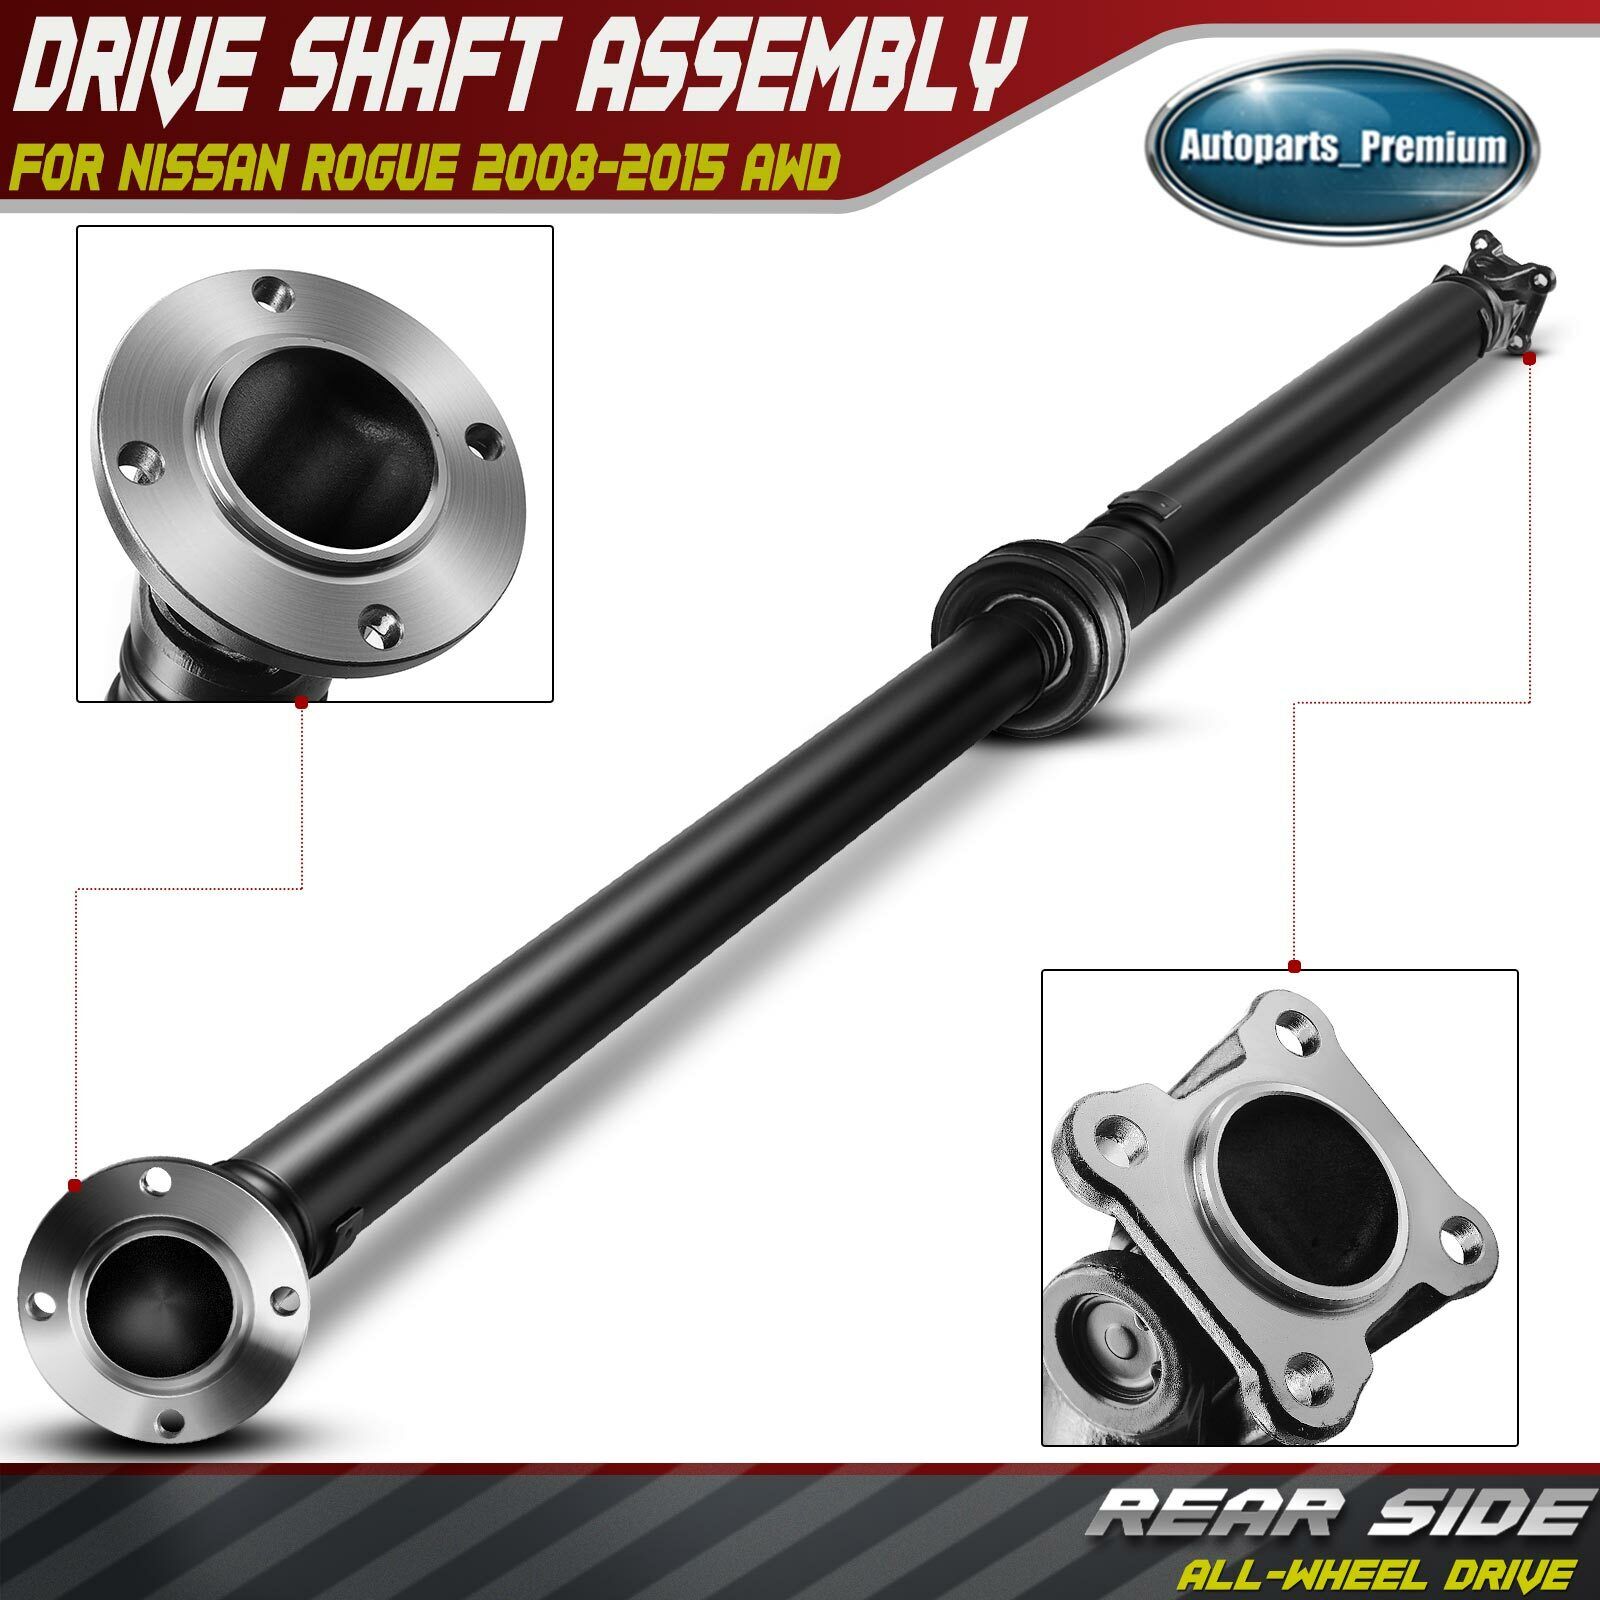 New Rear Complete Driveshaft Drive Shaft Assembly for Nissan Rogue 2008-2015 AWD